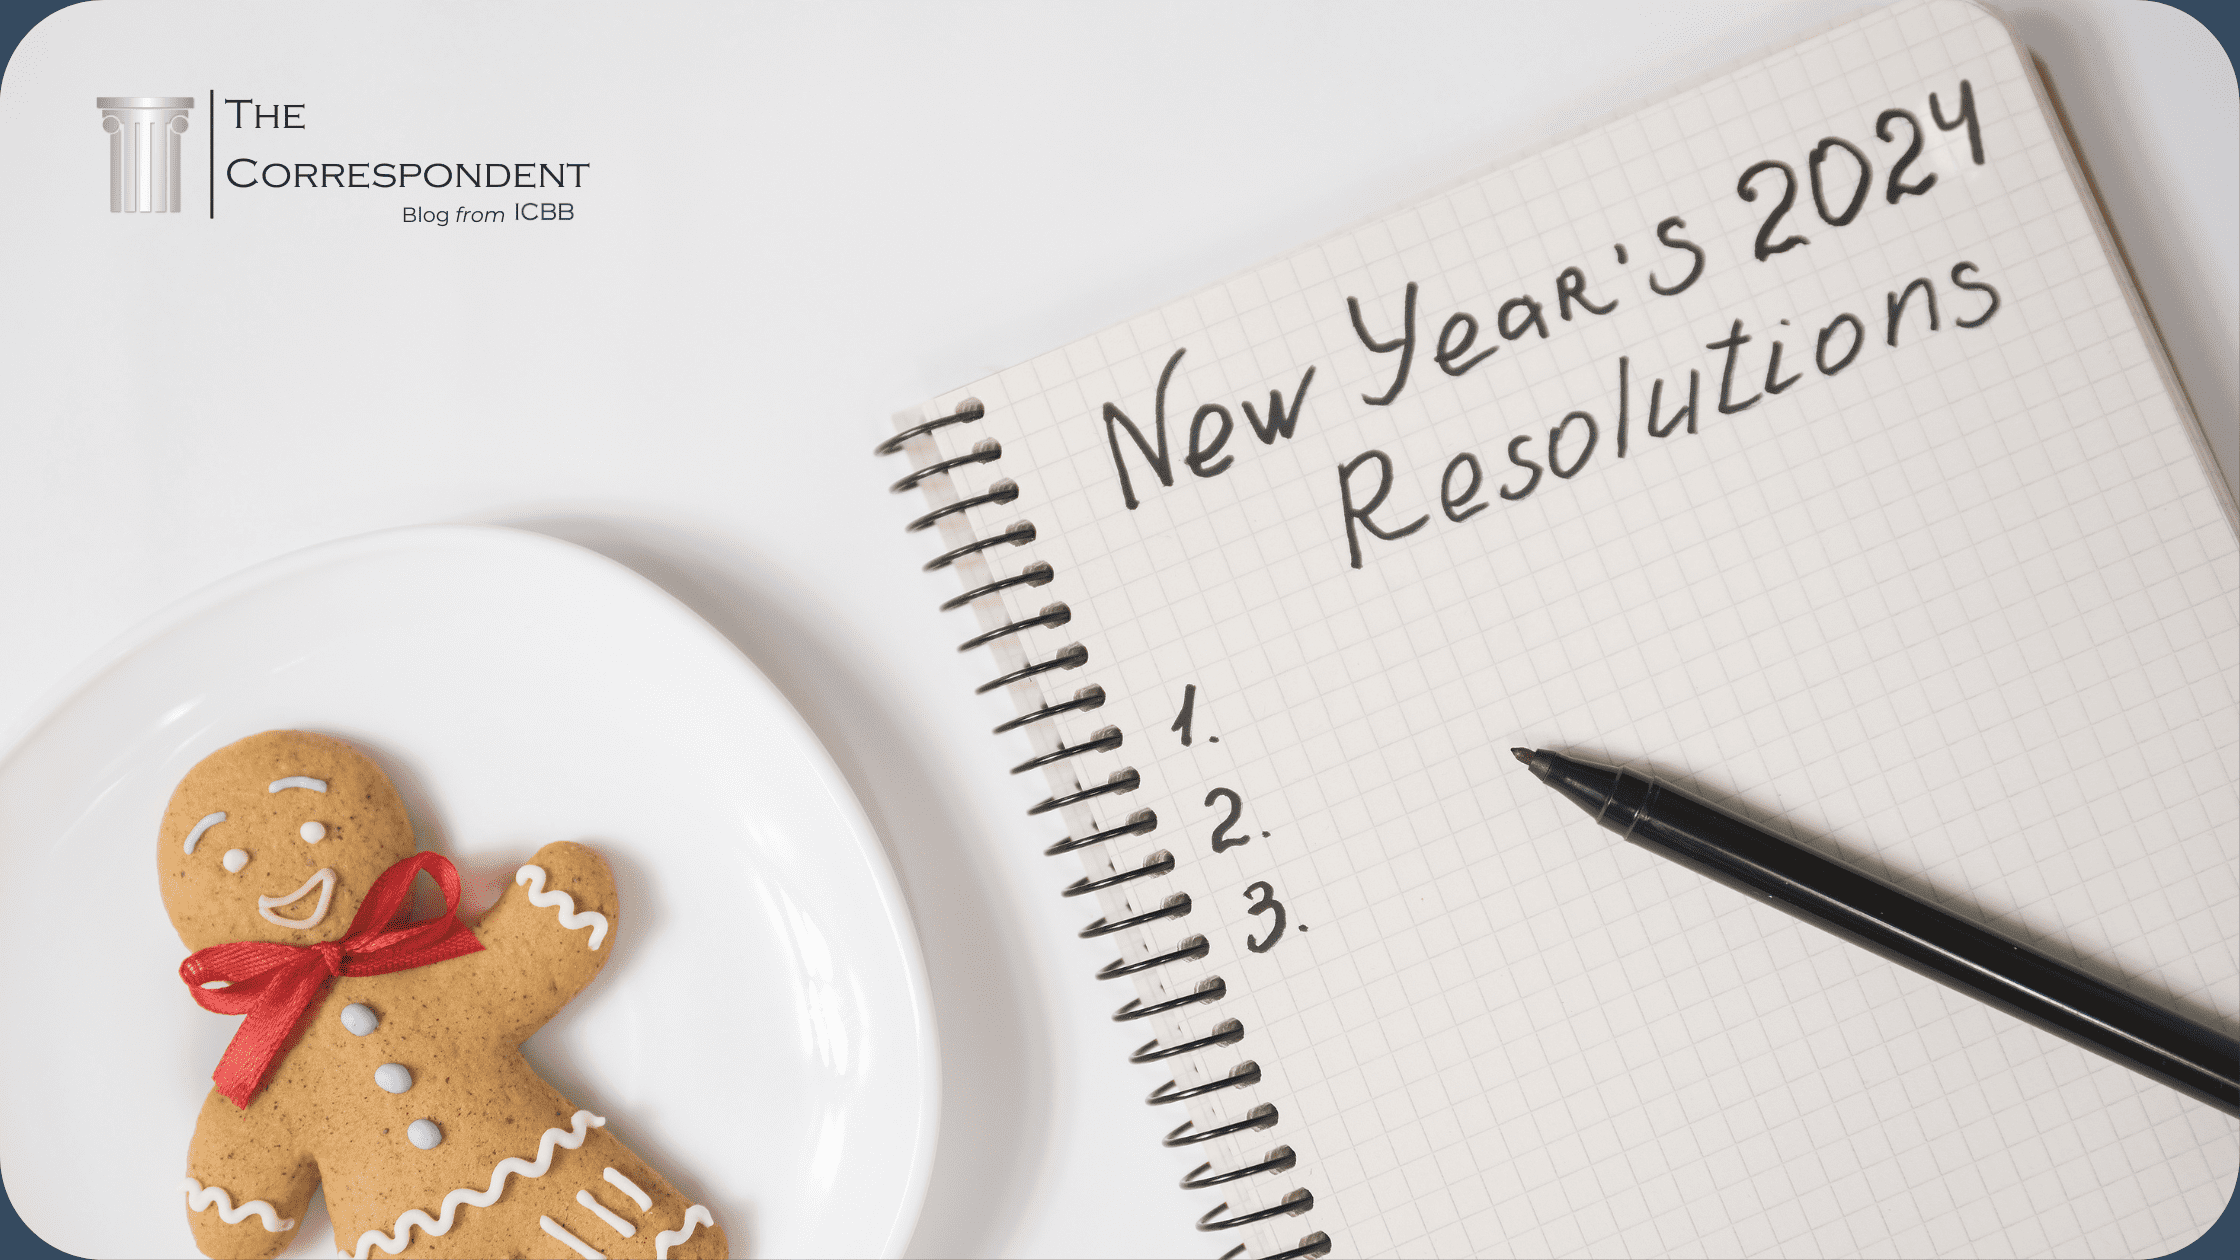 Building Financial Resolutions: A Guide for Community Banks in the New Year